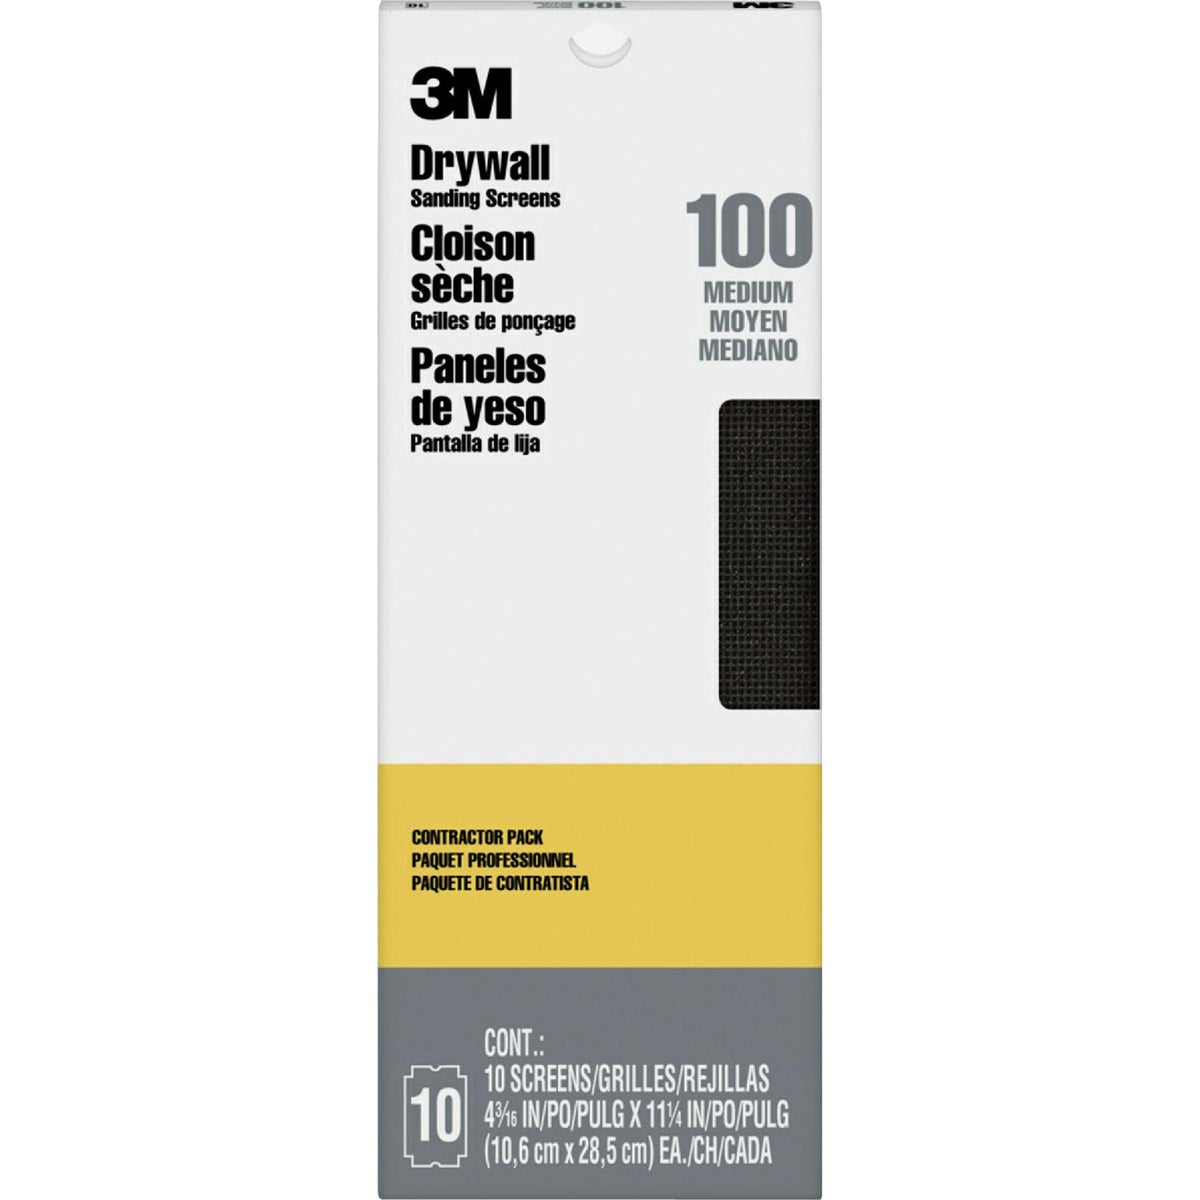 Item 311812, 3M Drywall Sanding Screens are designed for sanding drywall joints, 